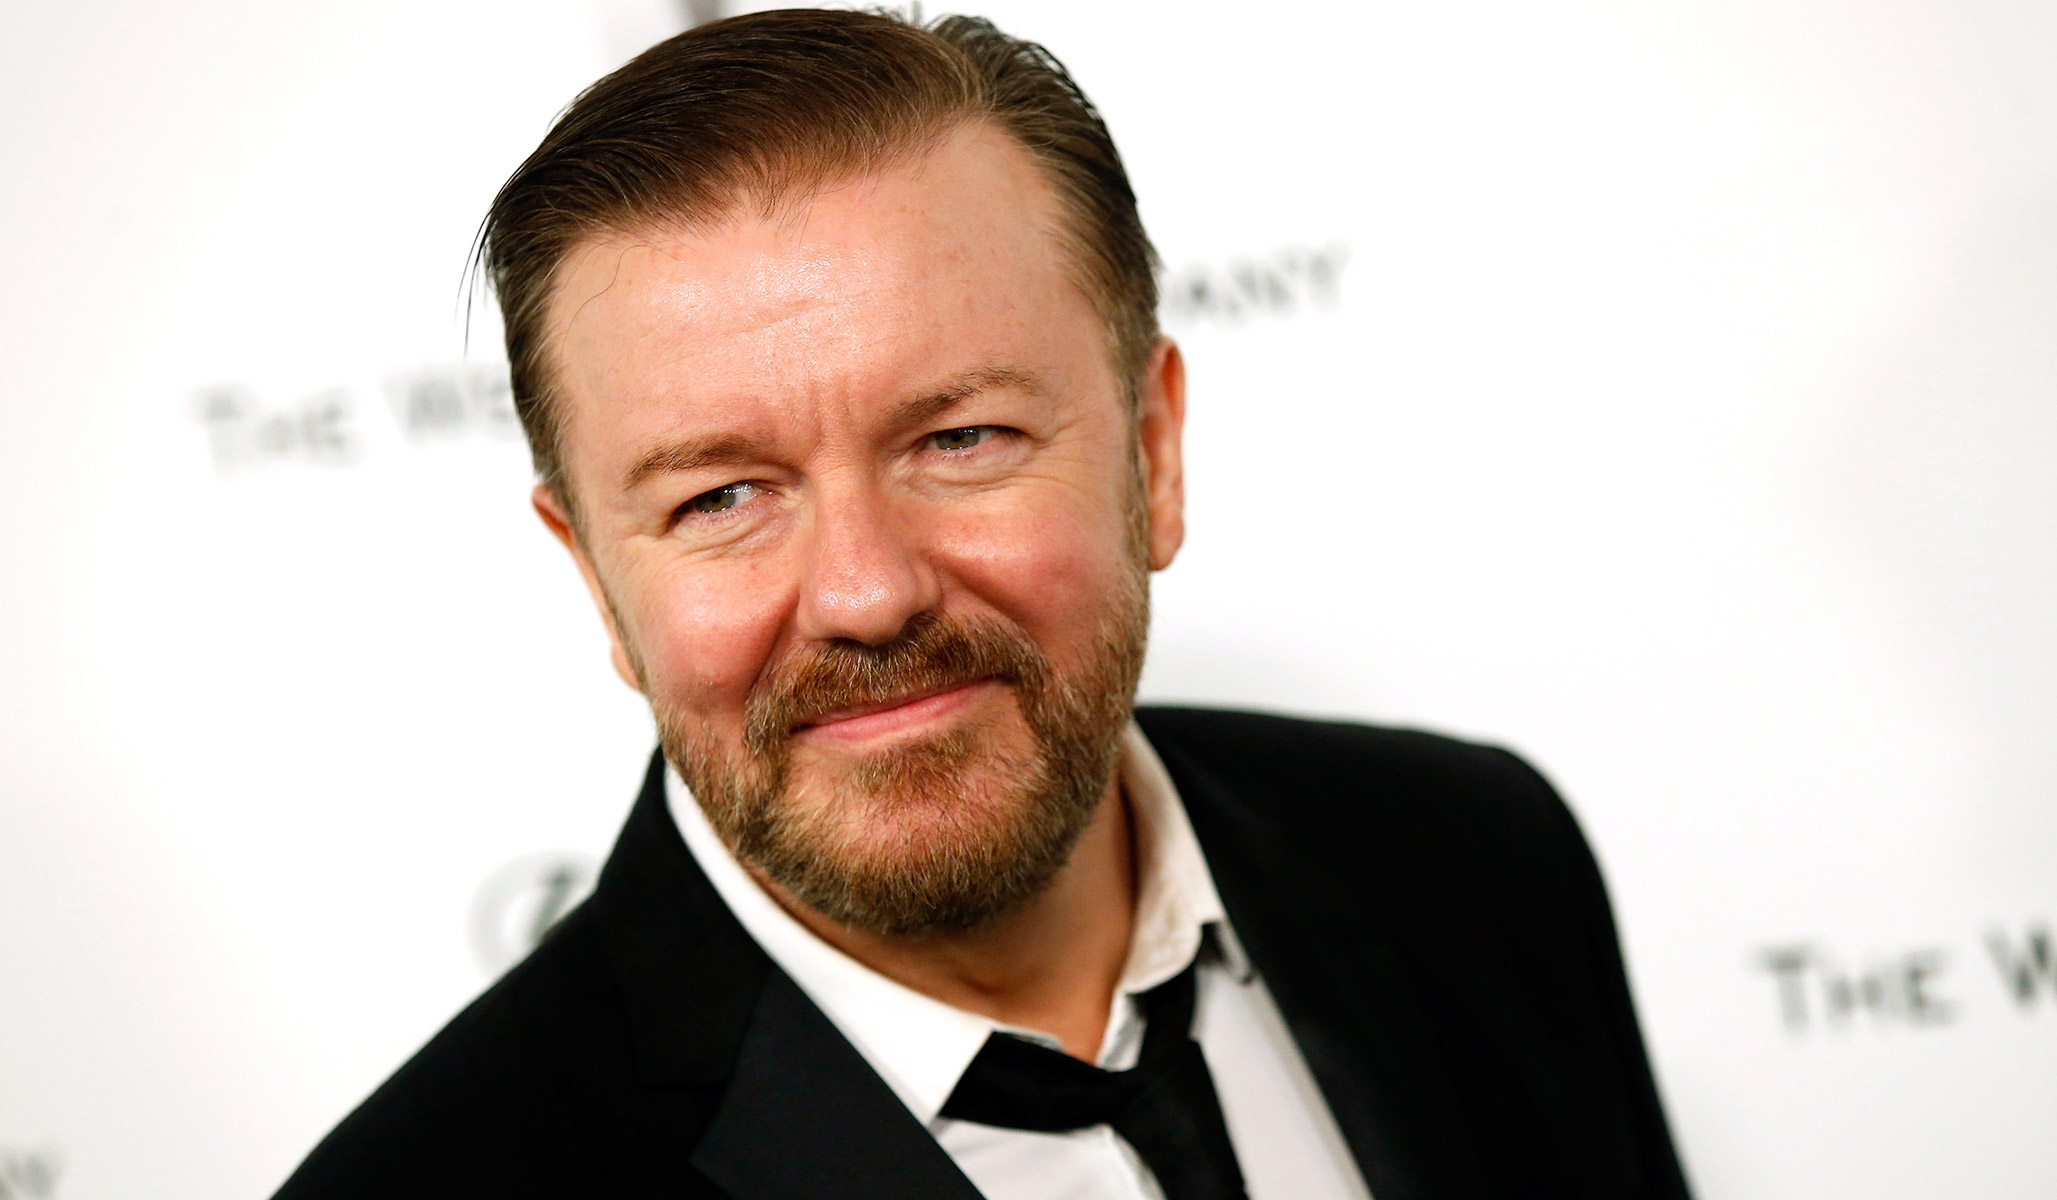 Ricky Gervais Takes On Verbal Terrorism: 'Don't Apologize' | National Review